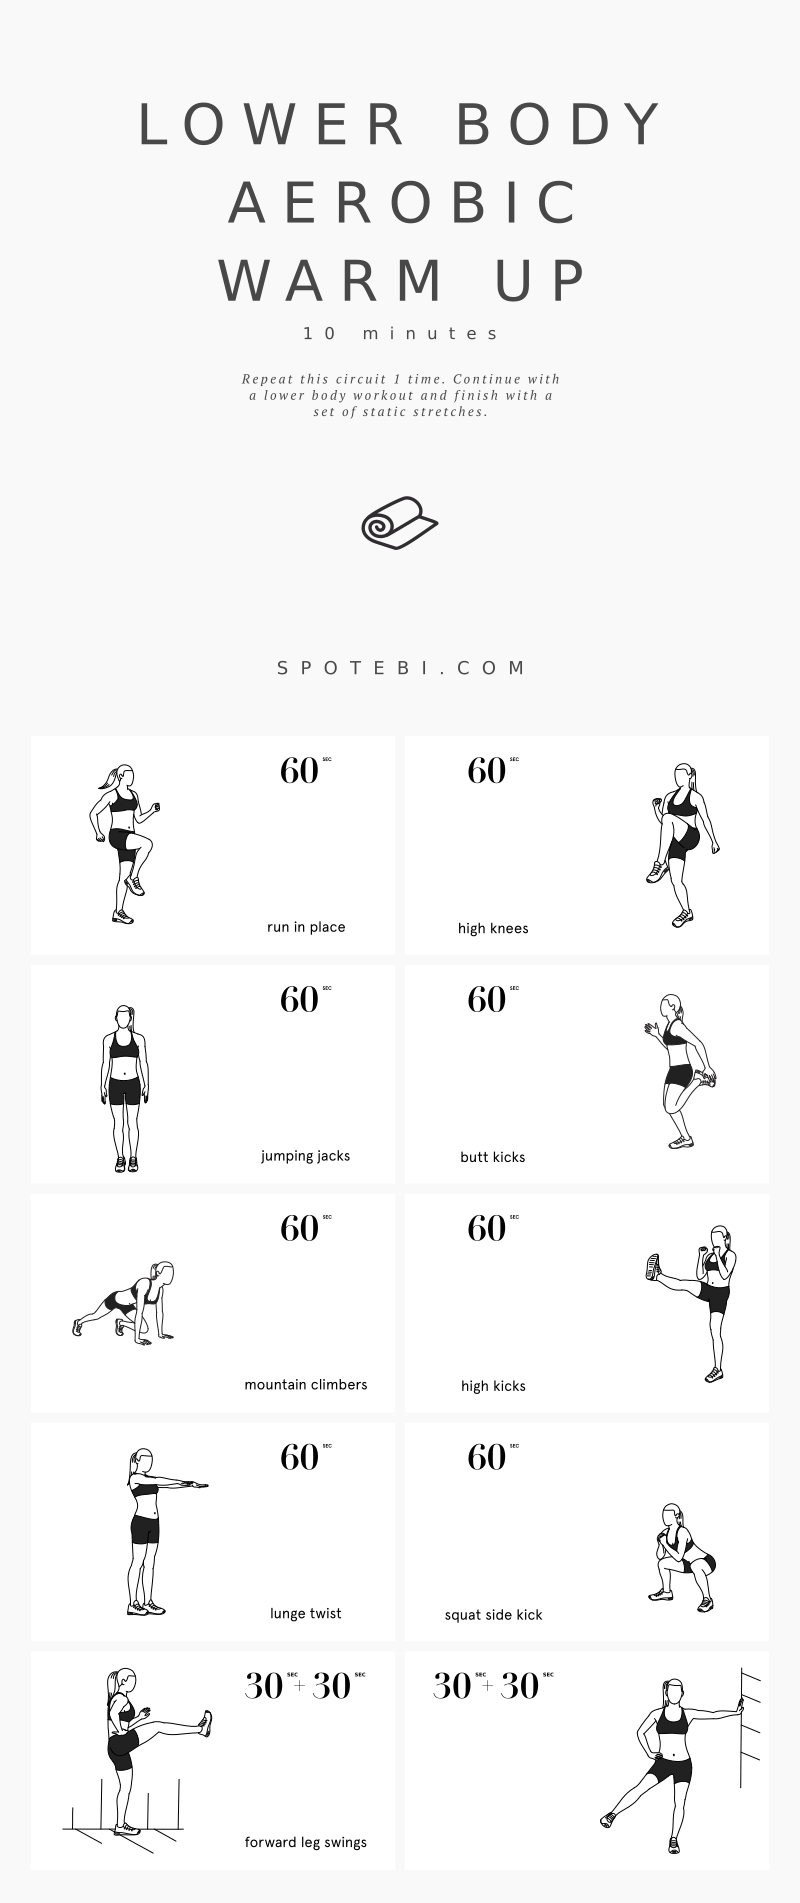 Prepare for leg day with this set of lower body warm up exercises. An at-home no-equipment aerobic routine, complete with instructions, calories burned, music playlist, and interval timer. https://www.spotebi.com/workout-routines/at-home-no-equipment-lower-body-warm-up-exercises/